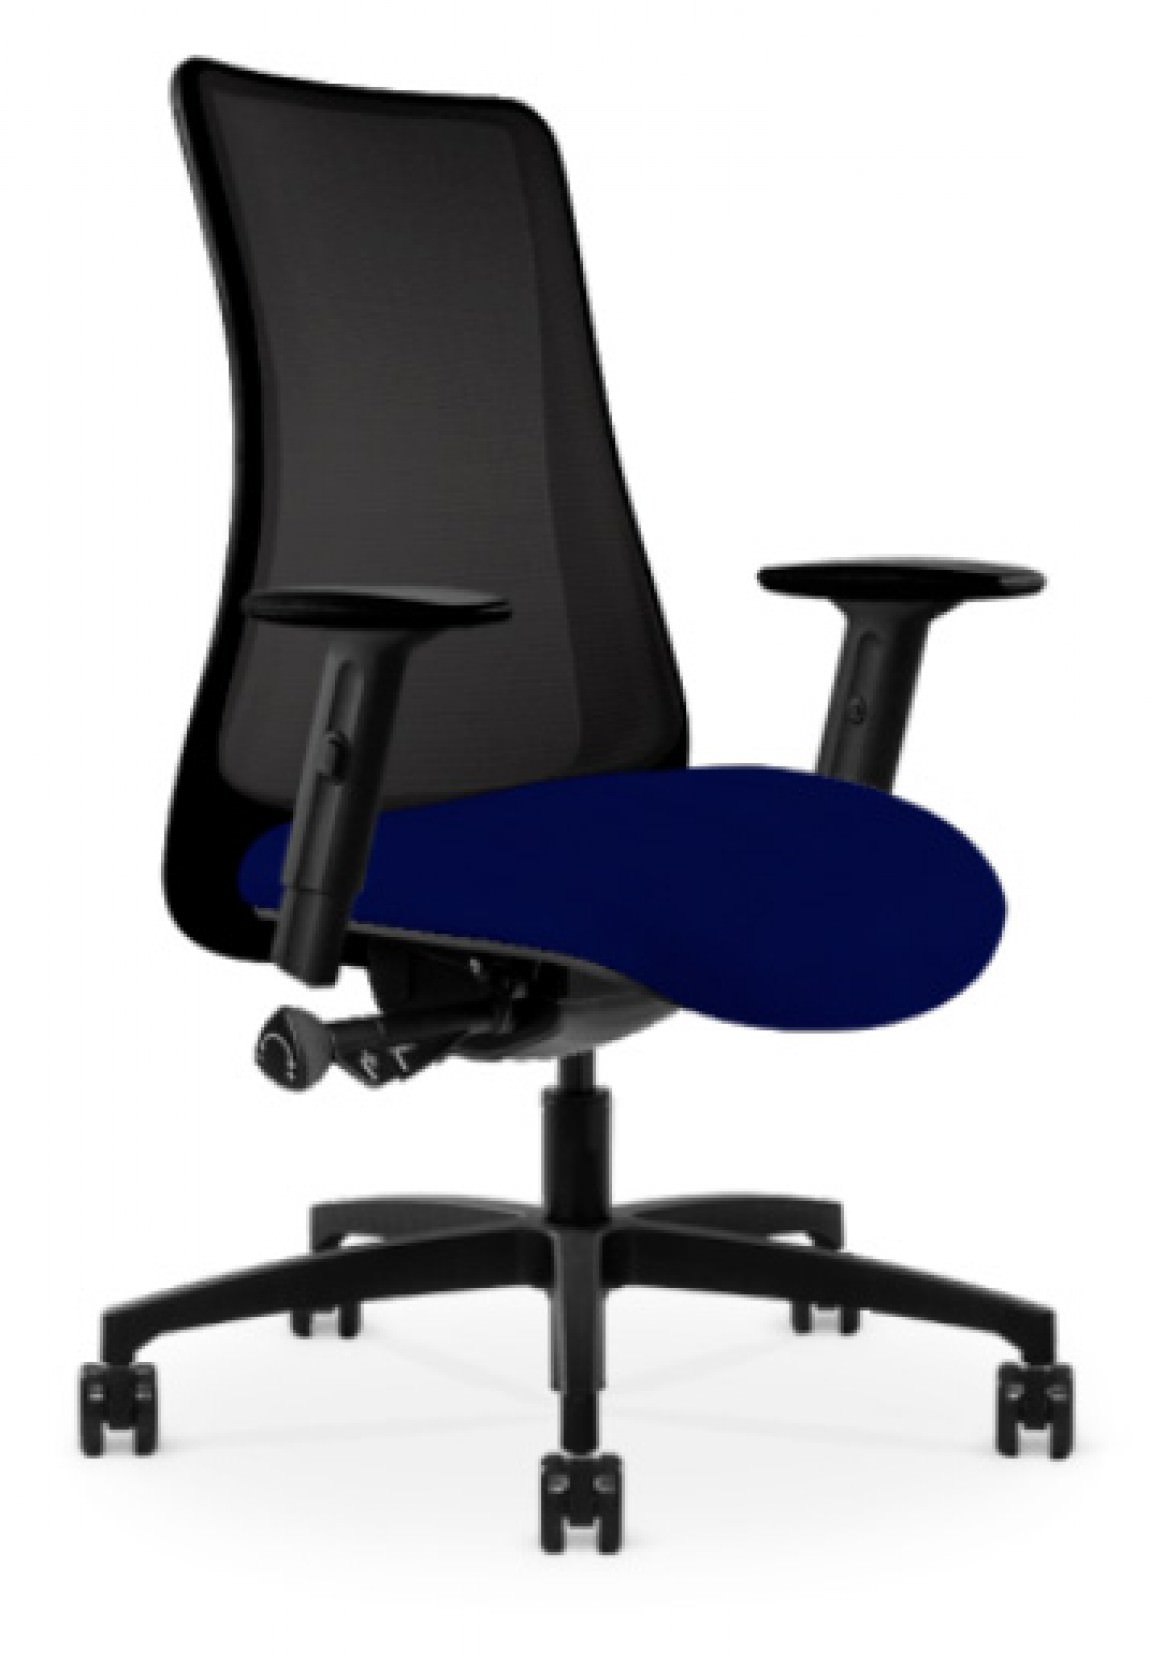 Black Copper Mesh Antimicrobial Office Chair w/ Blue Seat